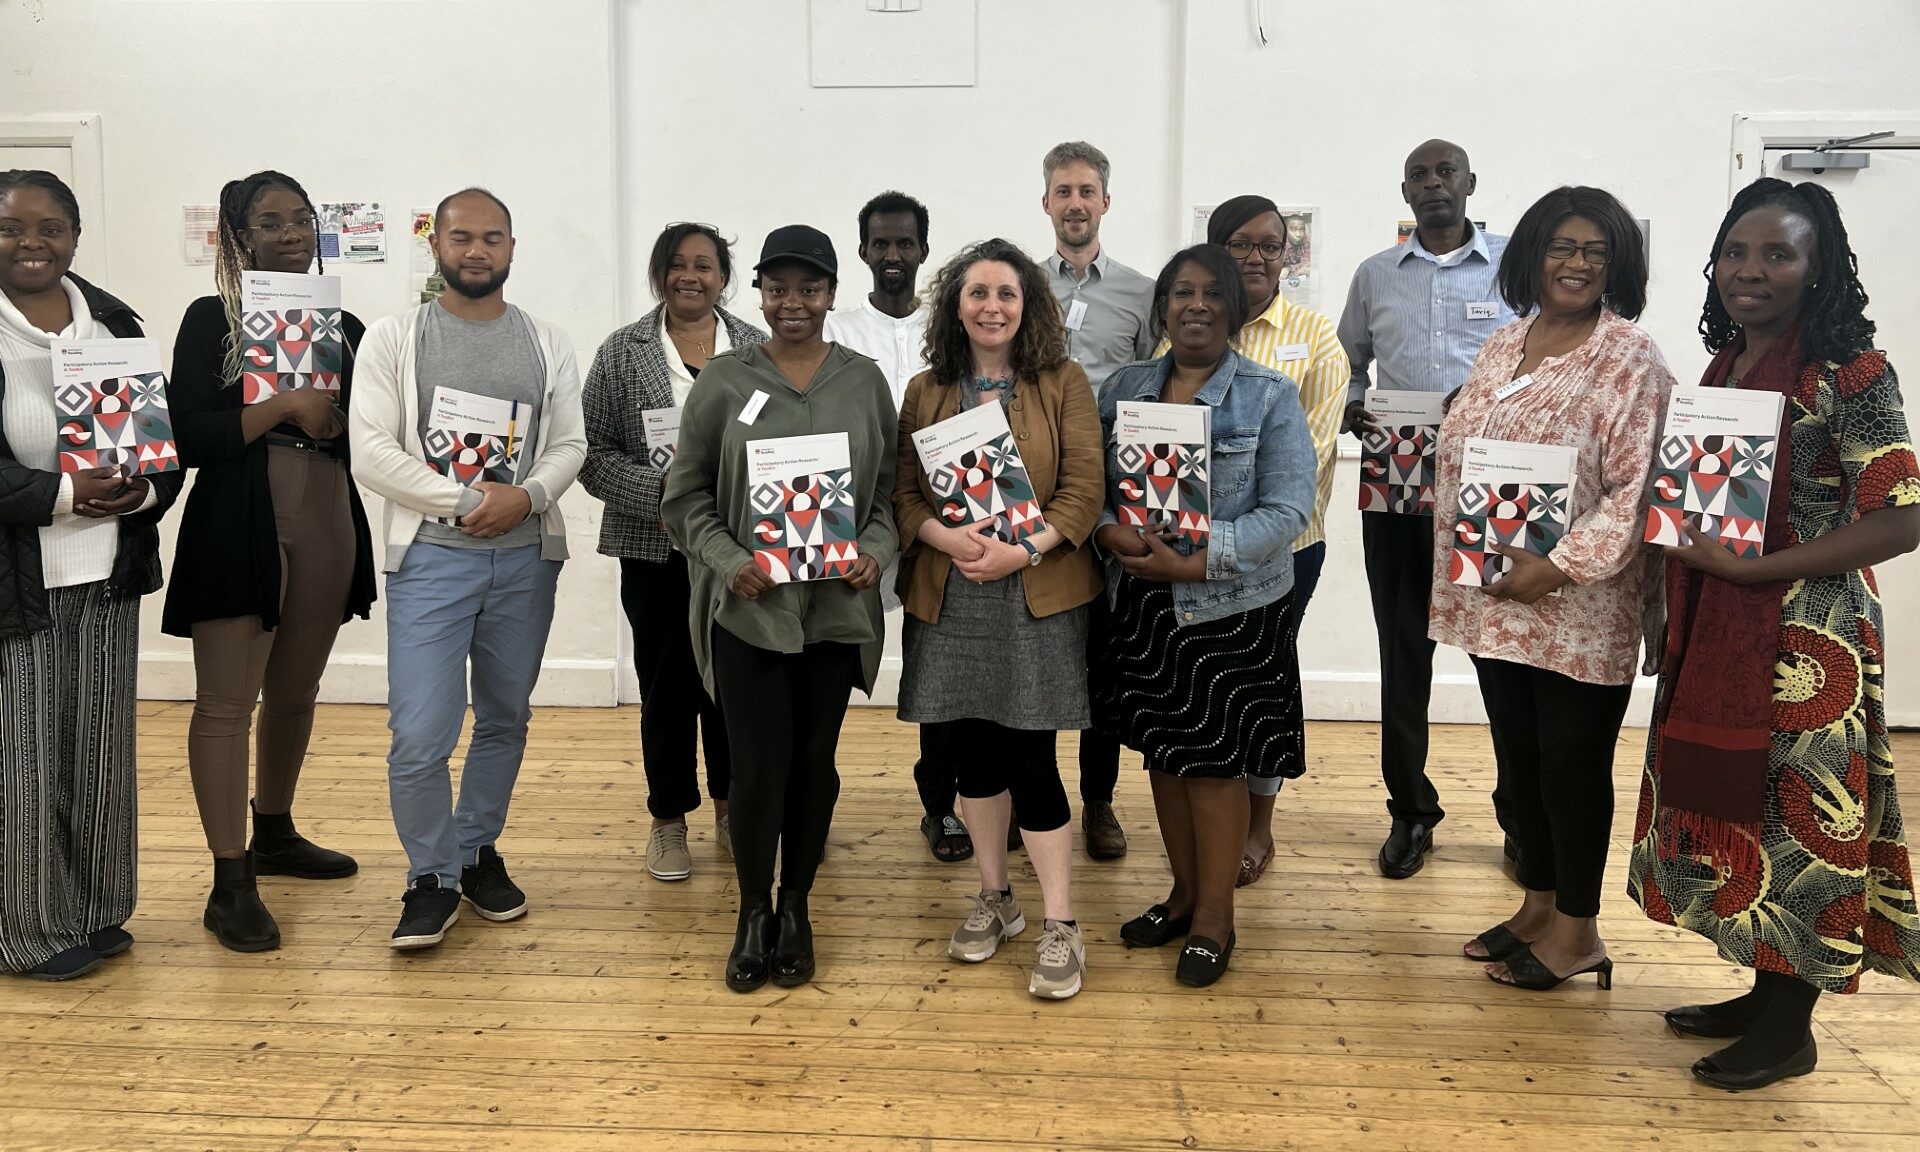 Community researchers and trainers pose for a group photo. They are standing, smiling at the camera and holding copies of Participatory Action Research: A Toolkit